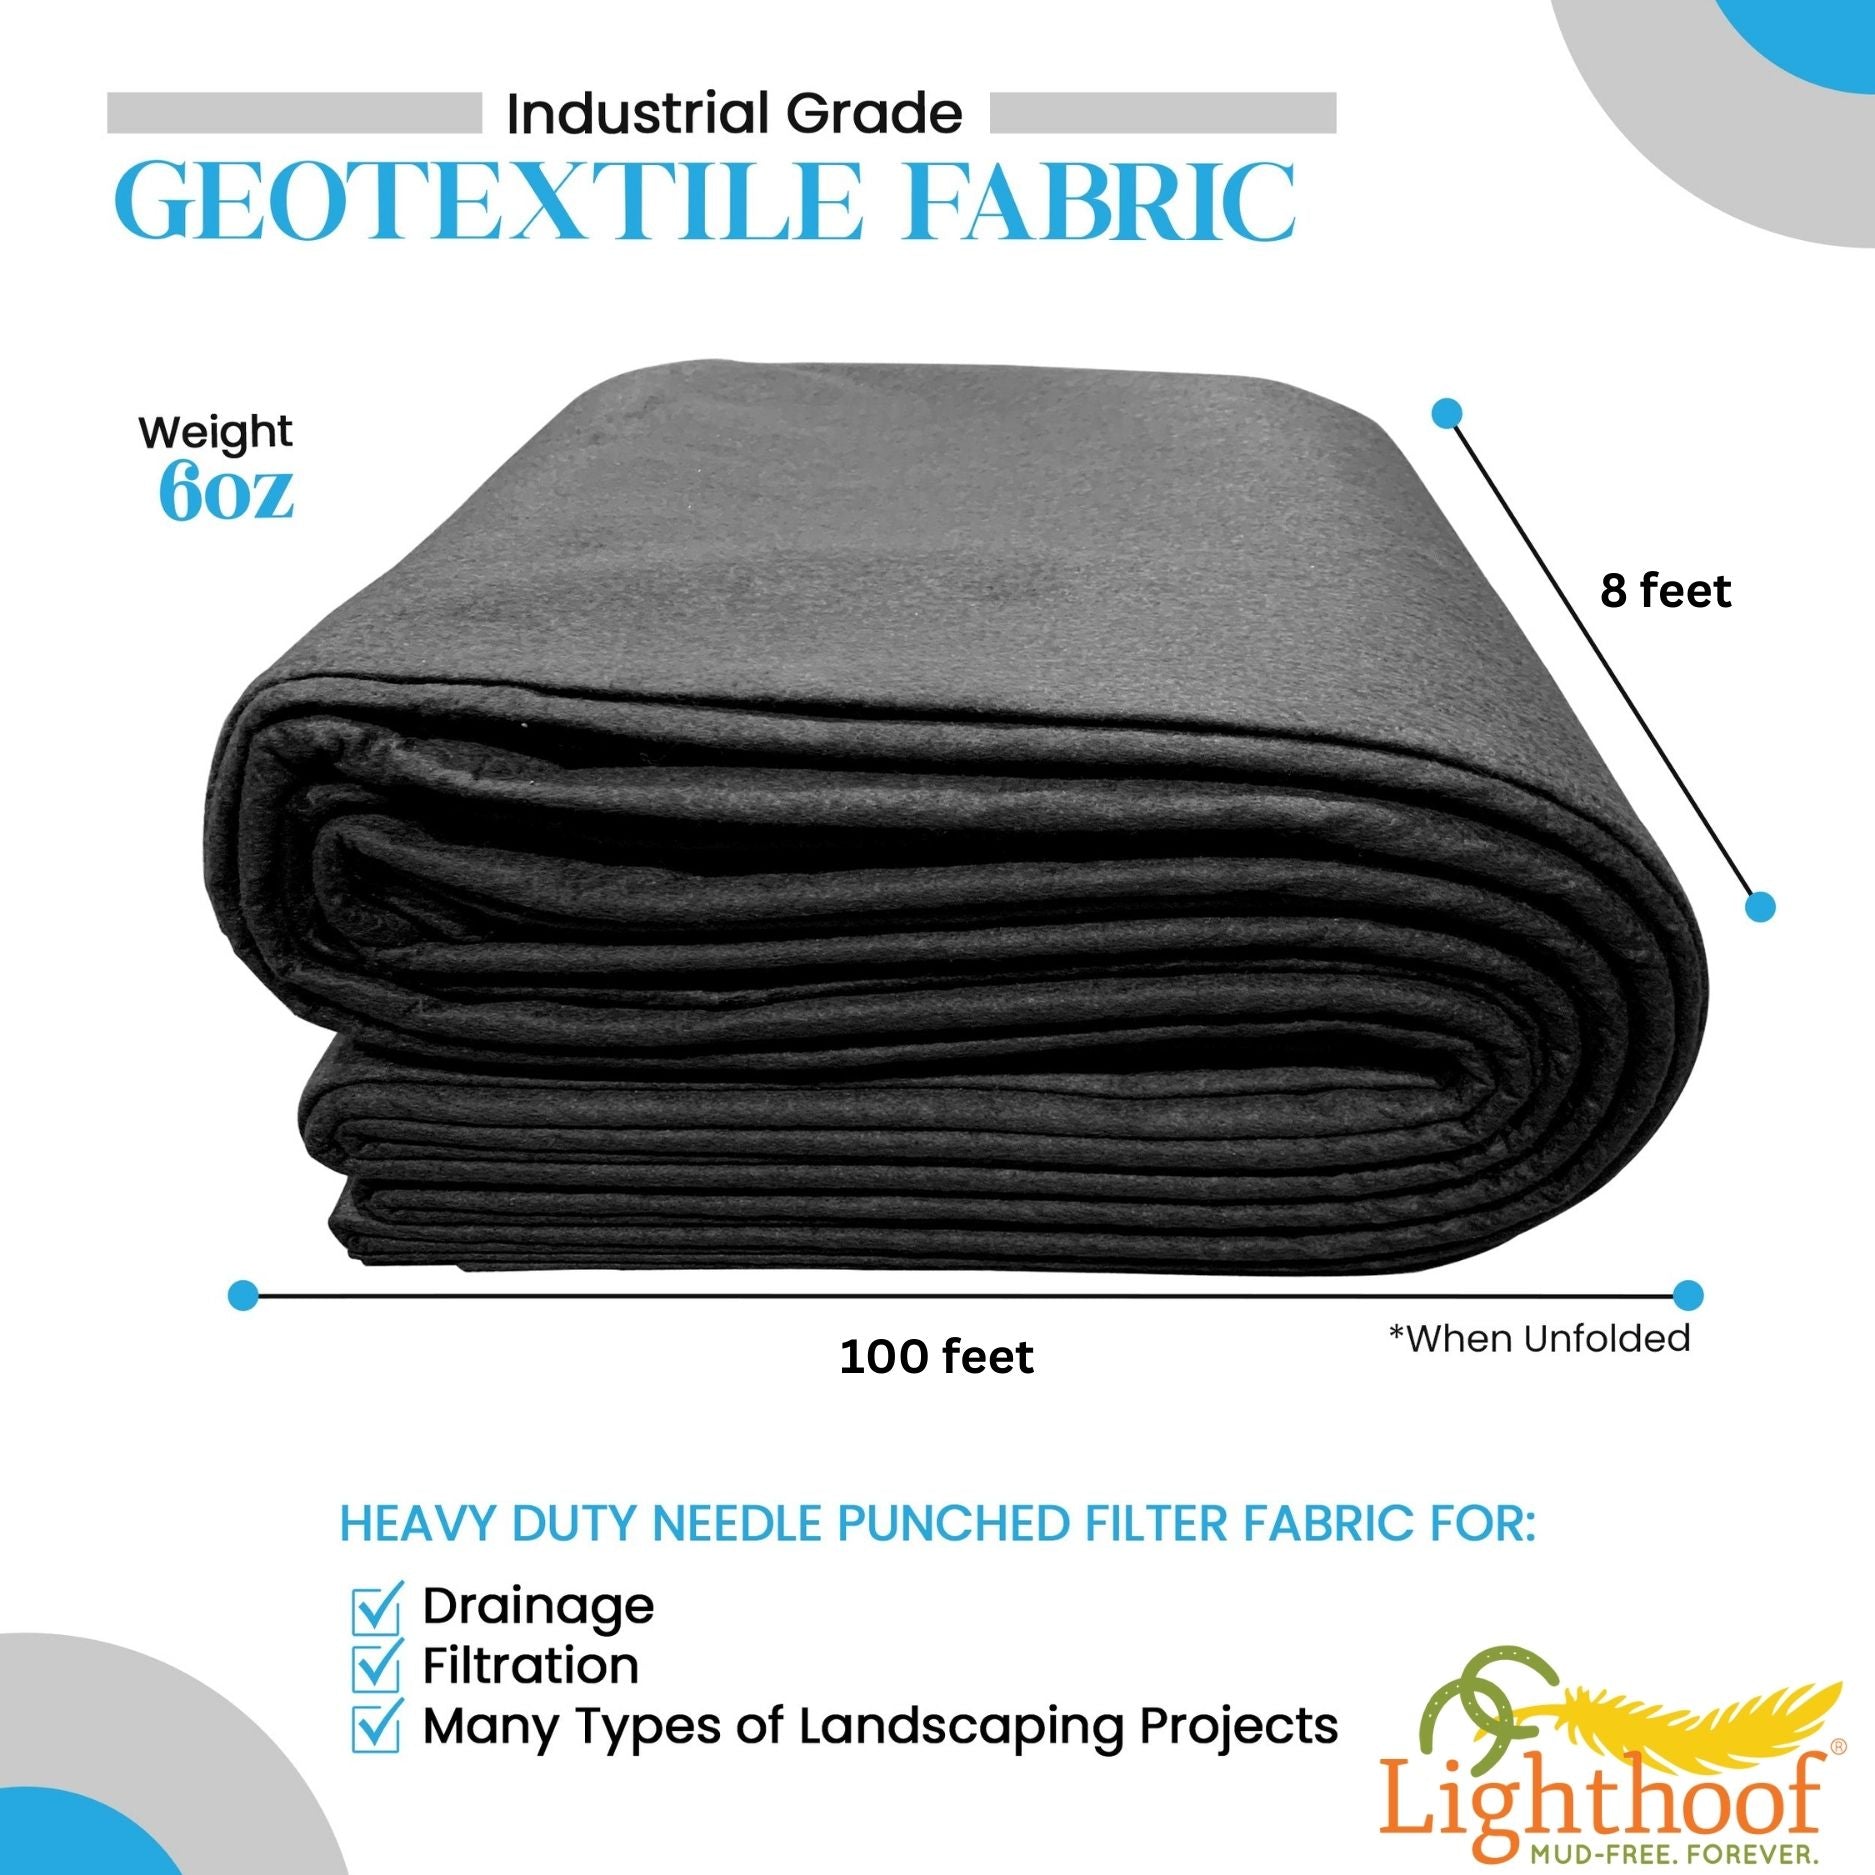 6 oz Non Woven Needle Punched Geotextile Filter Fabric - 50 Year Fabric - Lighthoof